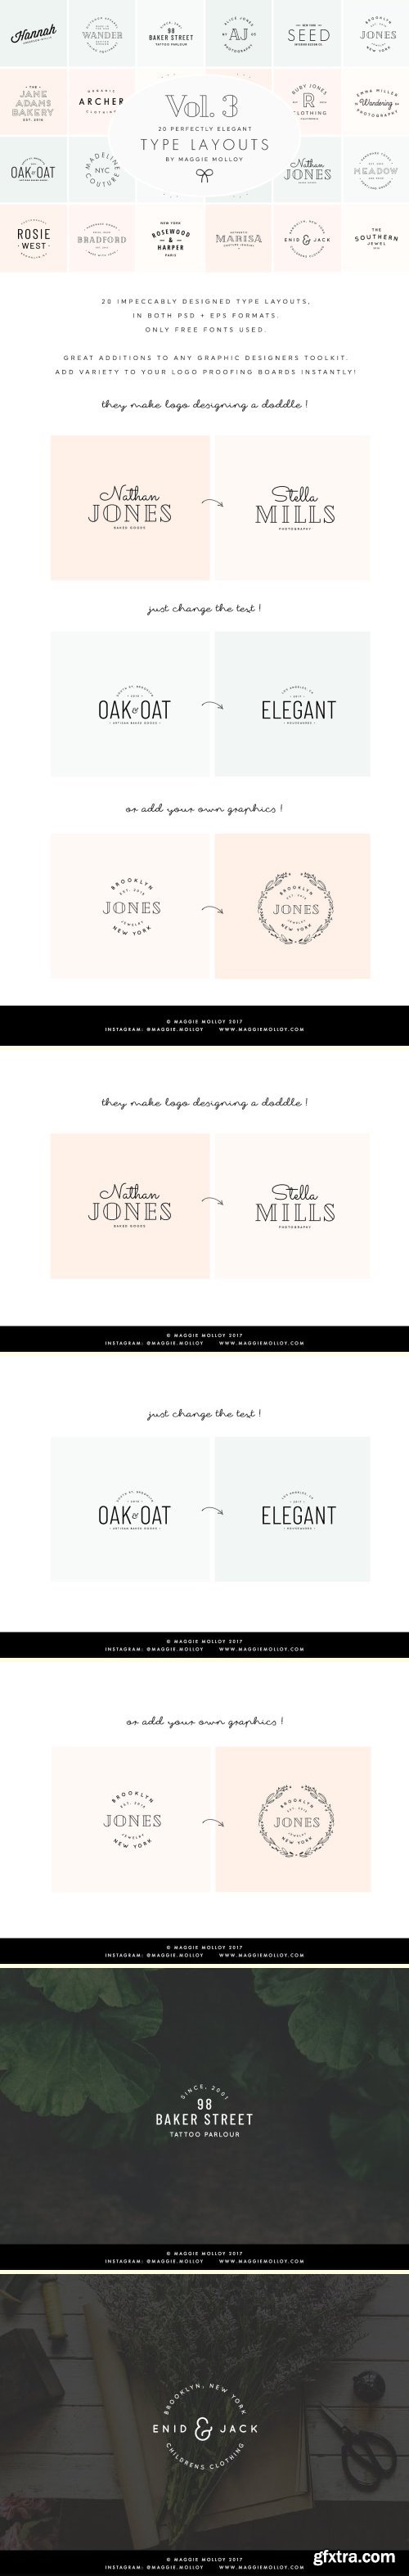 CM - Type Layouts Vol. 3 Text Based Logos 2128086